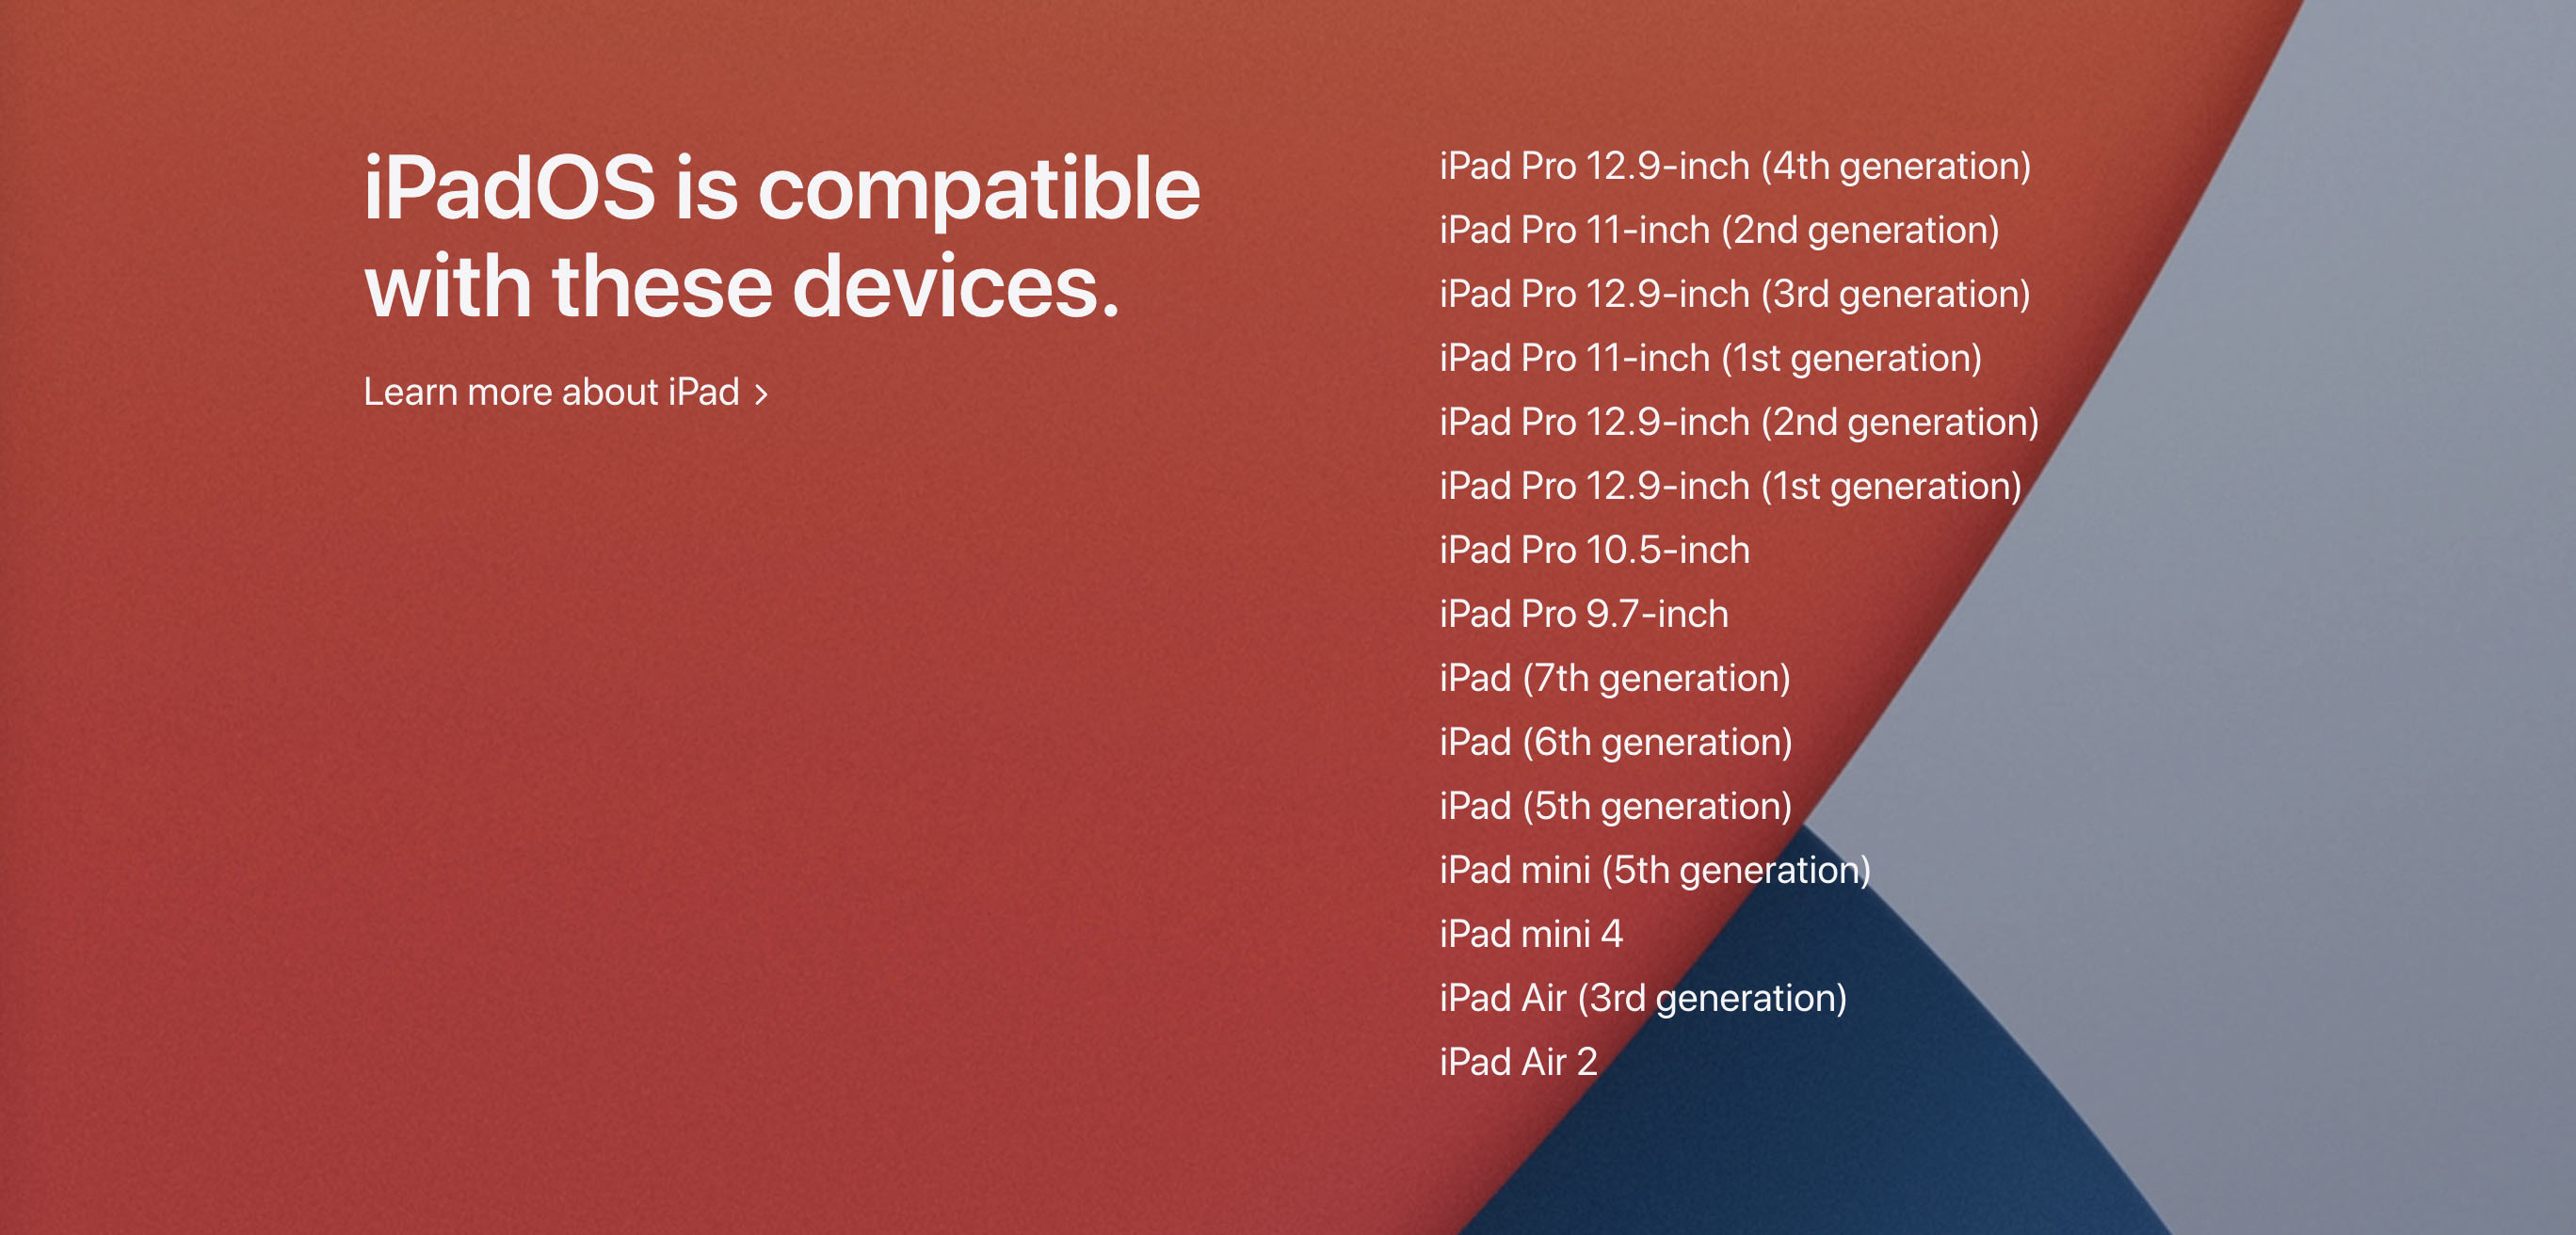 iOS 14: Features, release date, supported devices, and more | Macworld